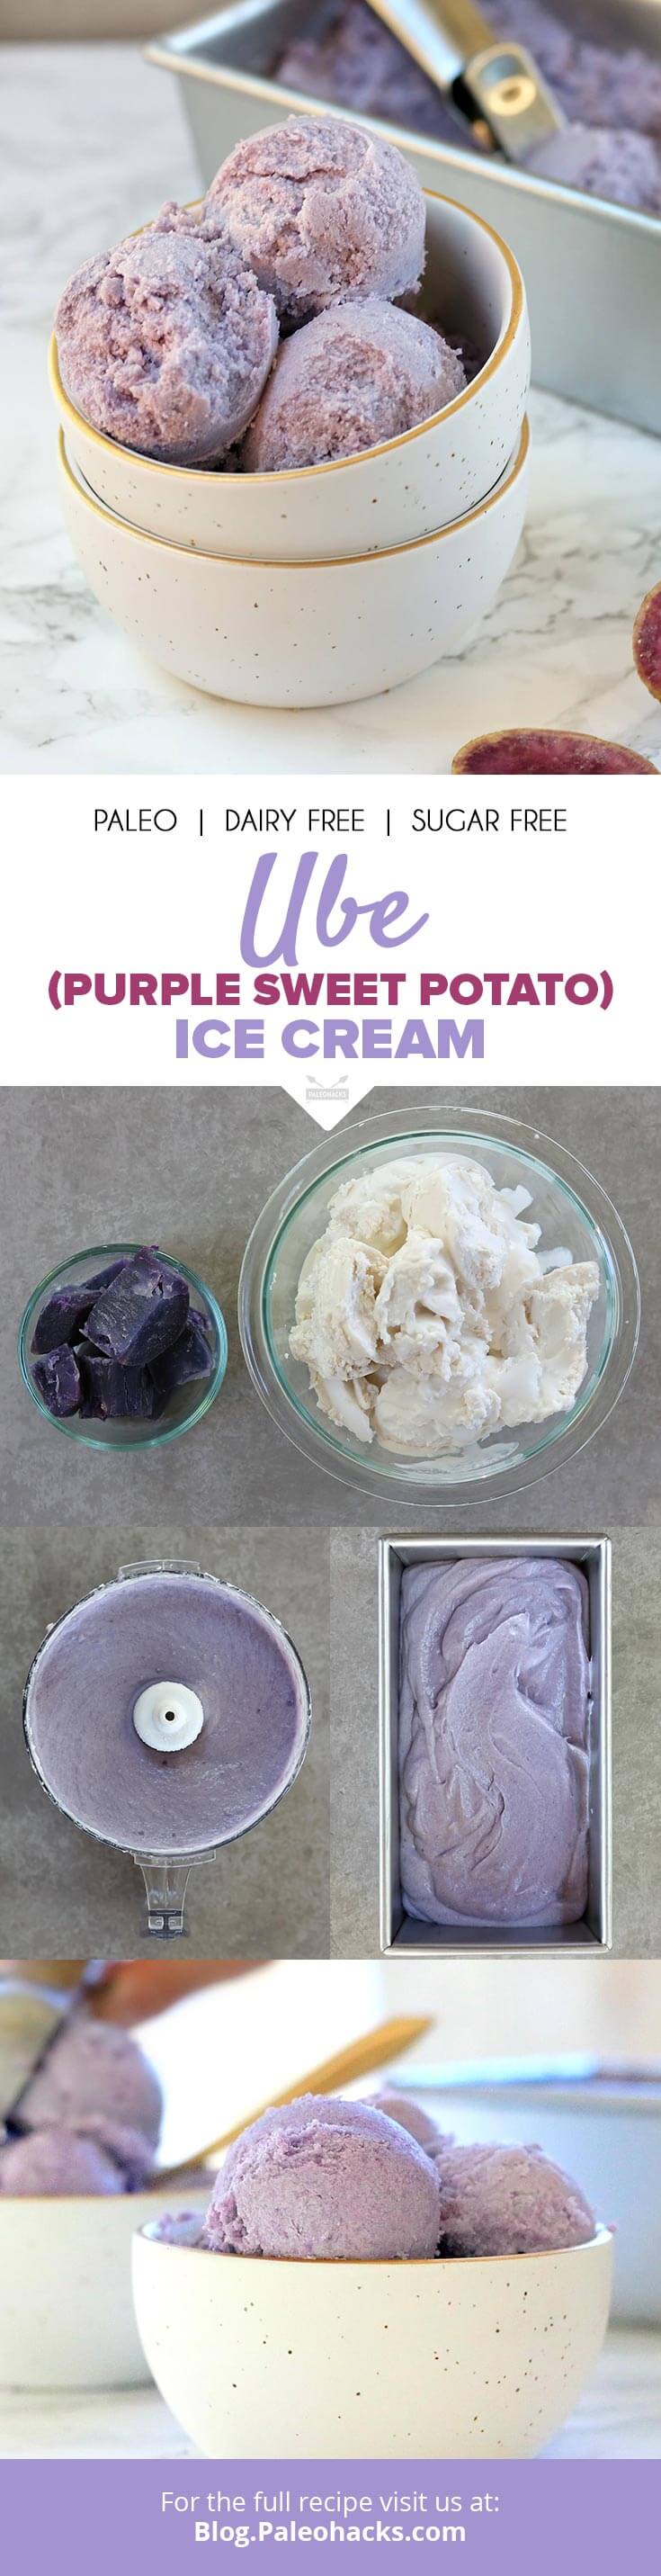 This easy, no-churn ube (purple sweet potato) ice cream recipe has only two ingredients - antioxidant-rich purple yams and silky coconut cream!